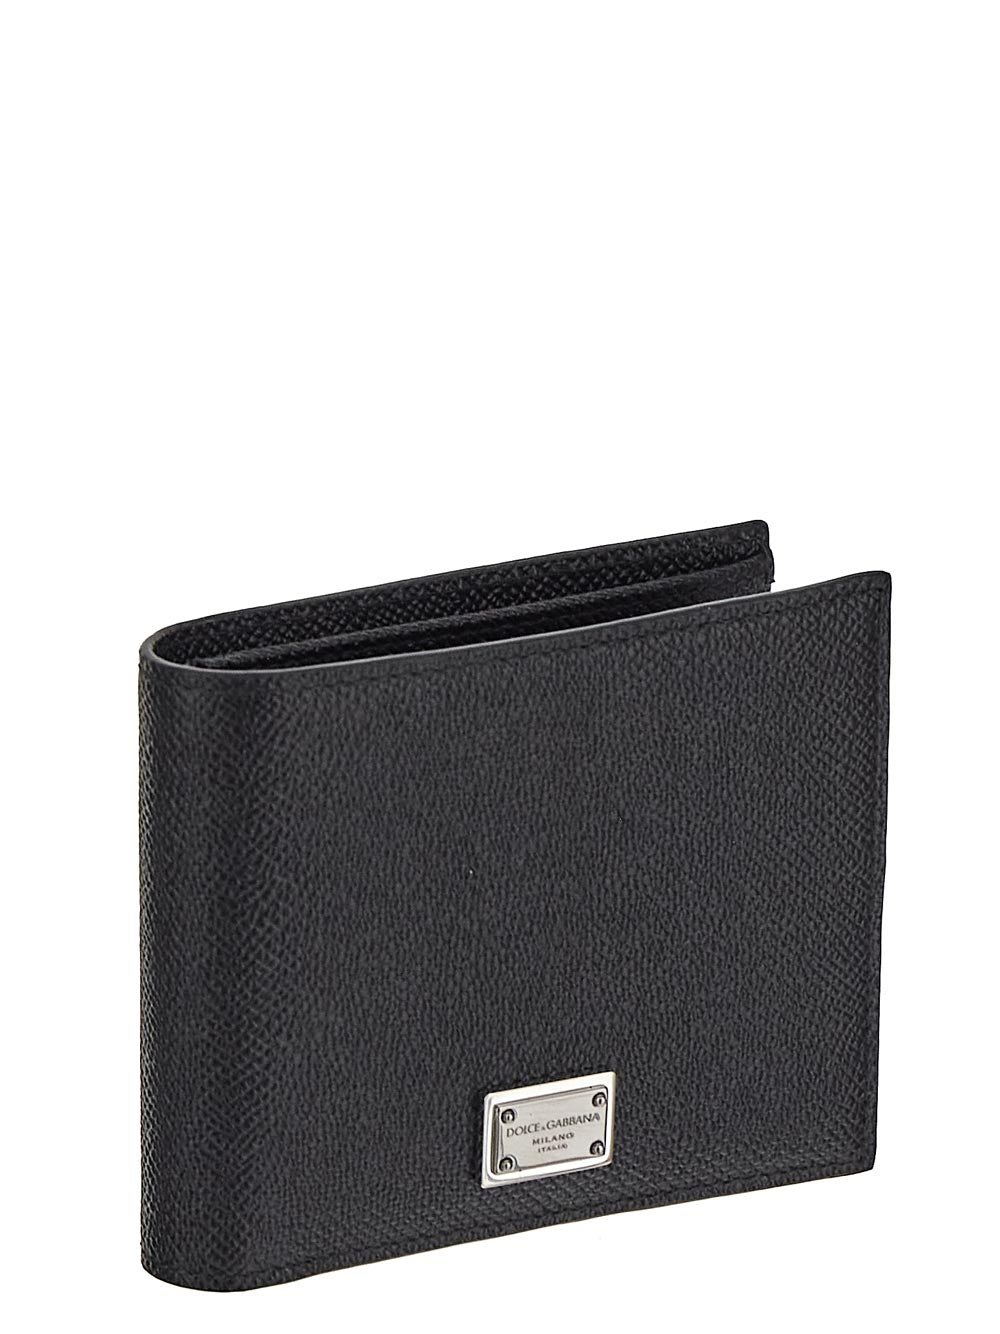 Dolce & Gabbana Calfskin Wallet With Coin Pocket And Logo Tag